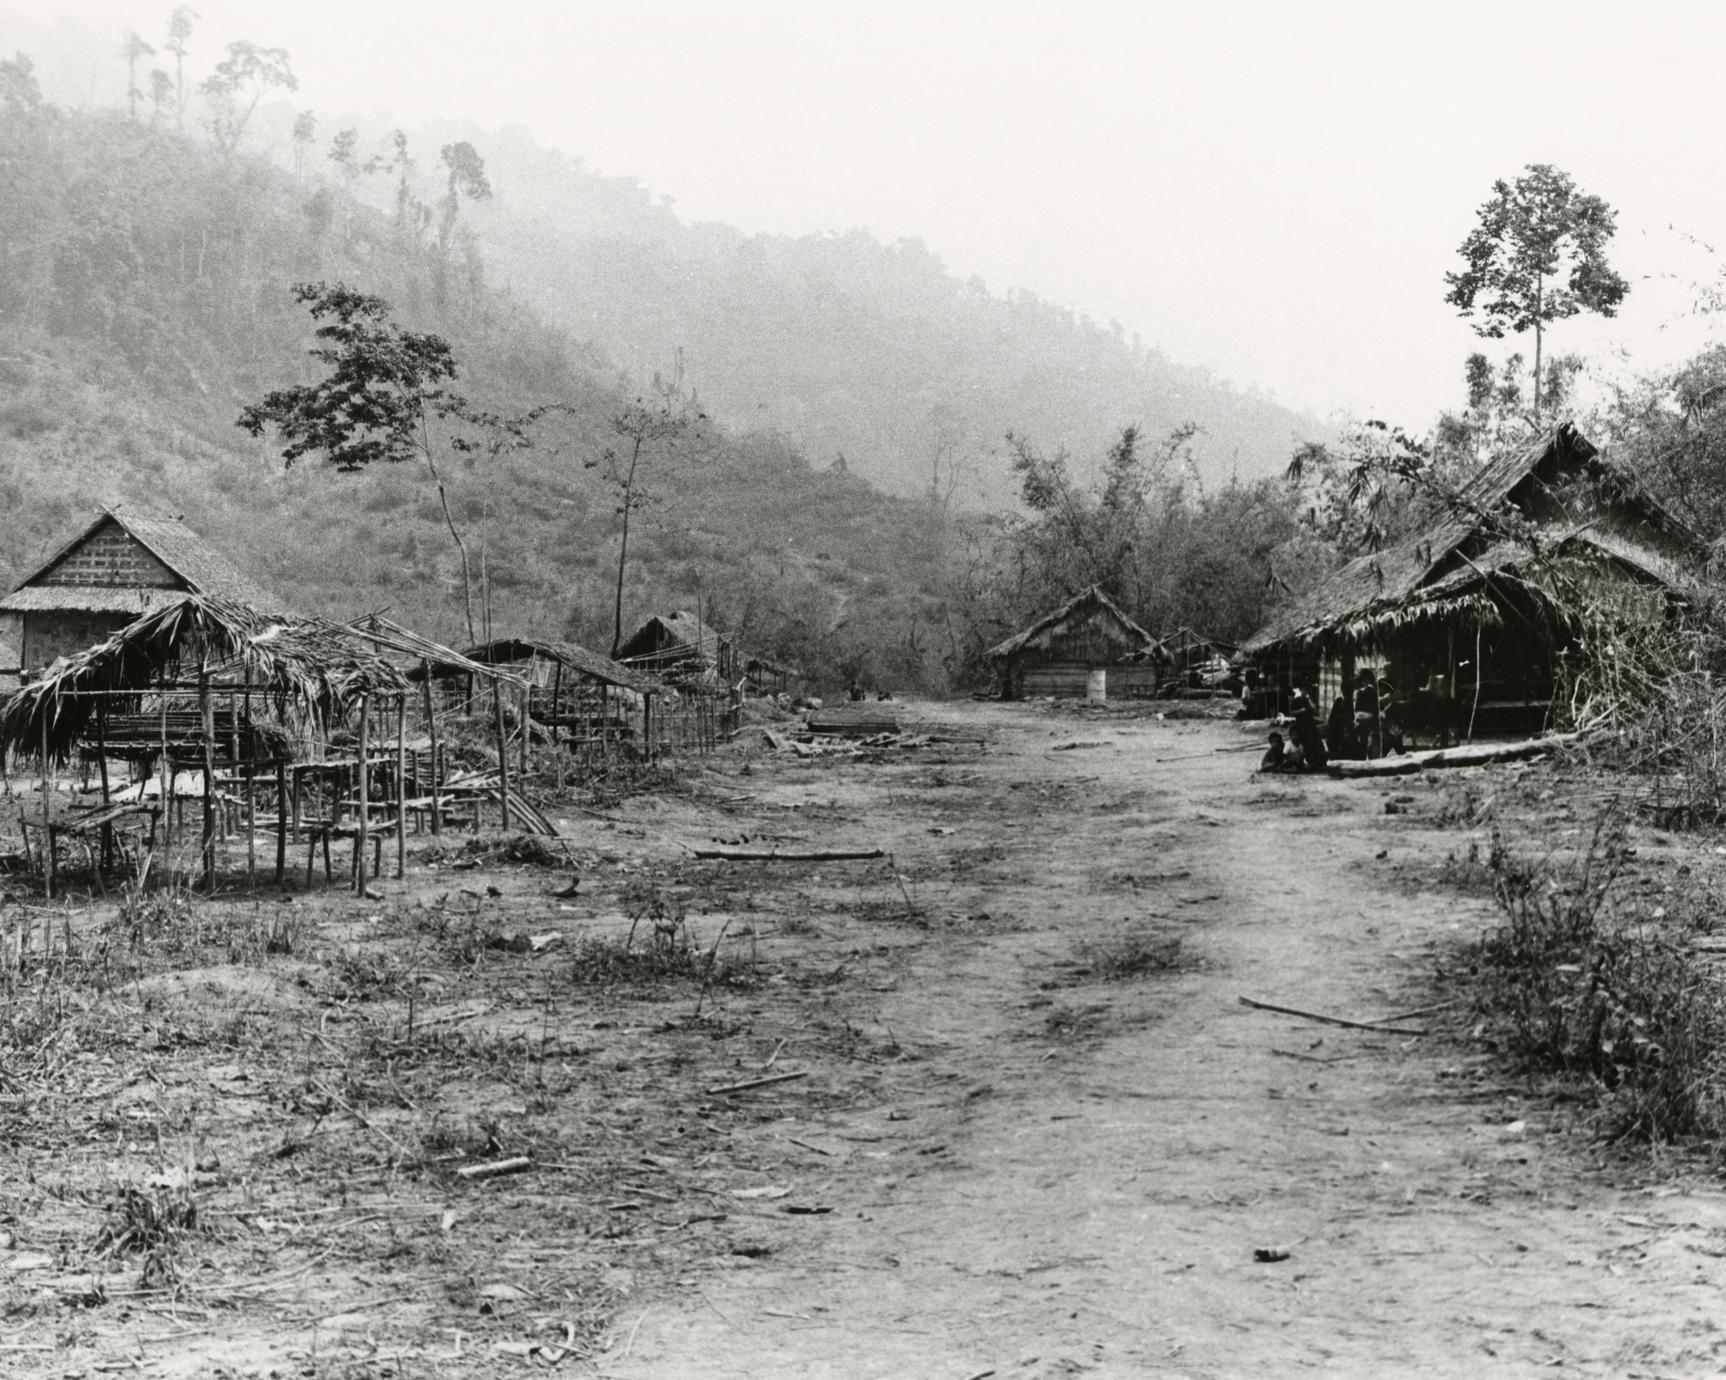 Refugee temporary location in Houa Khong Province